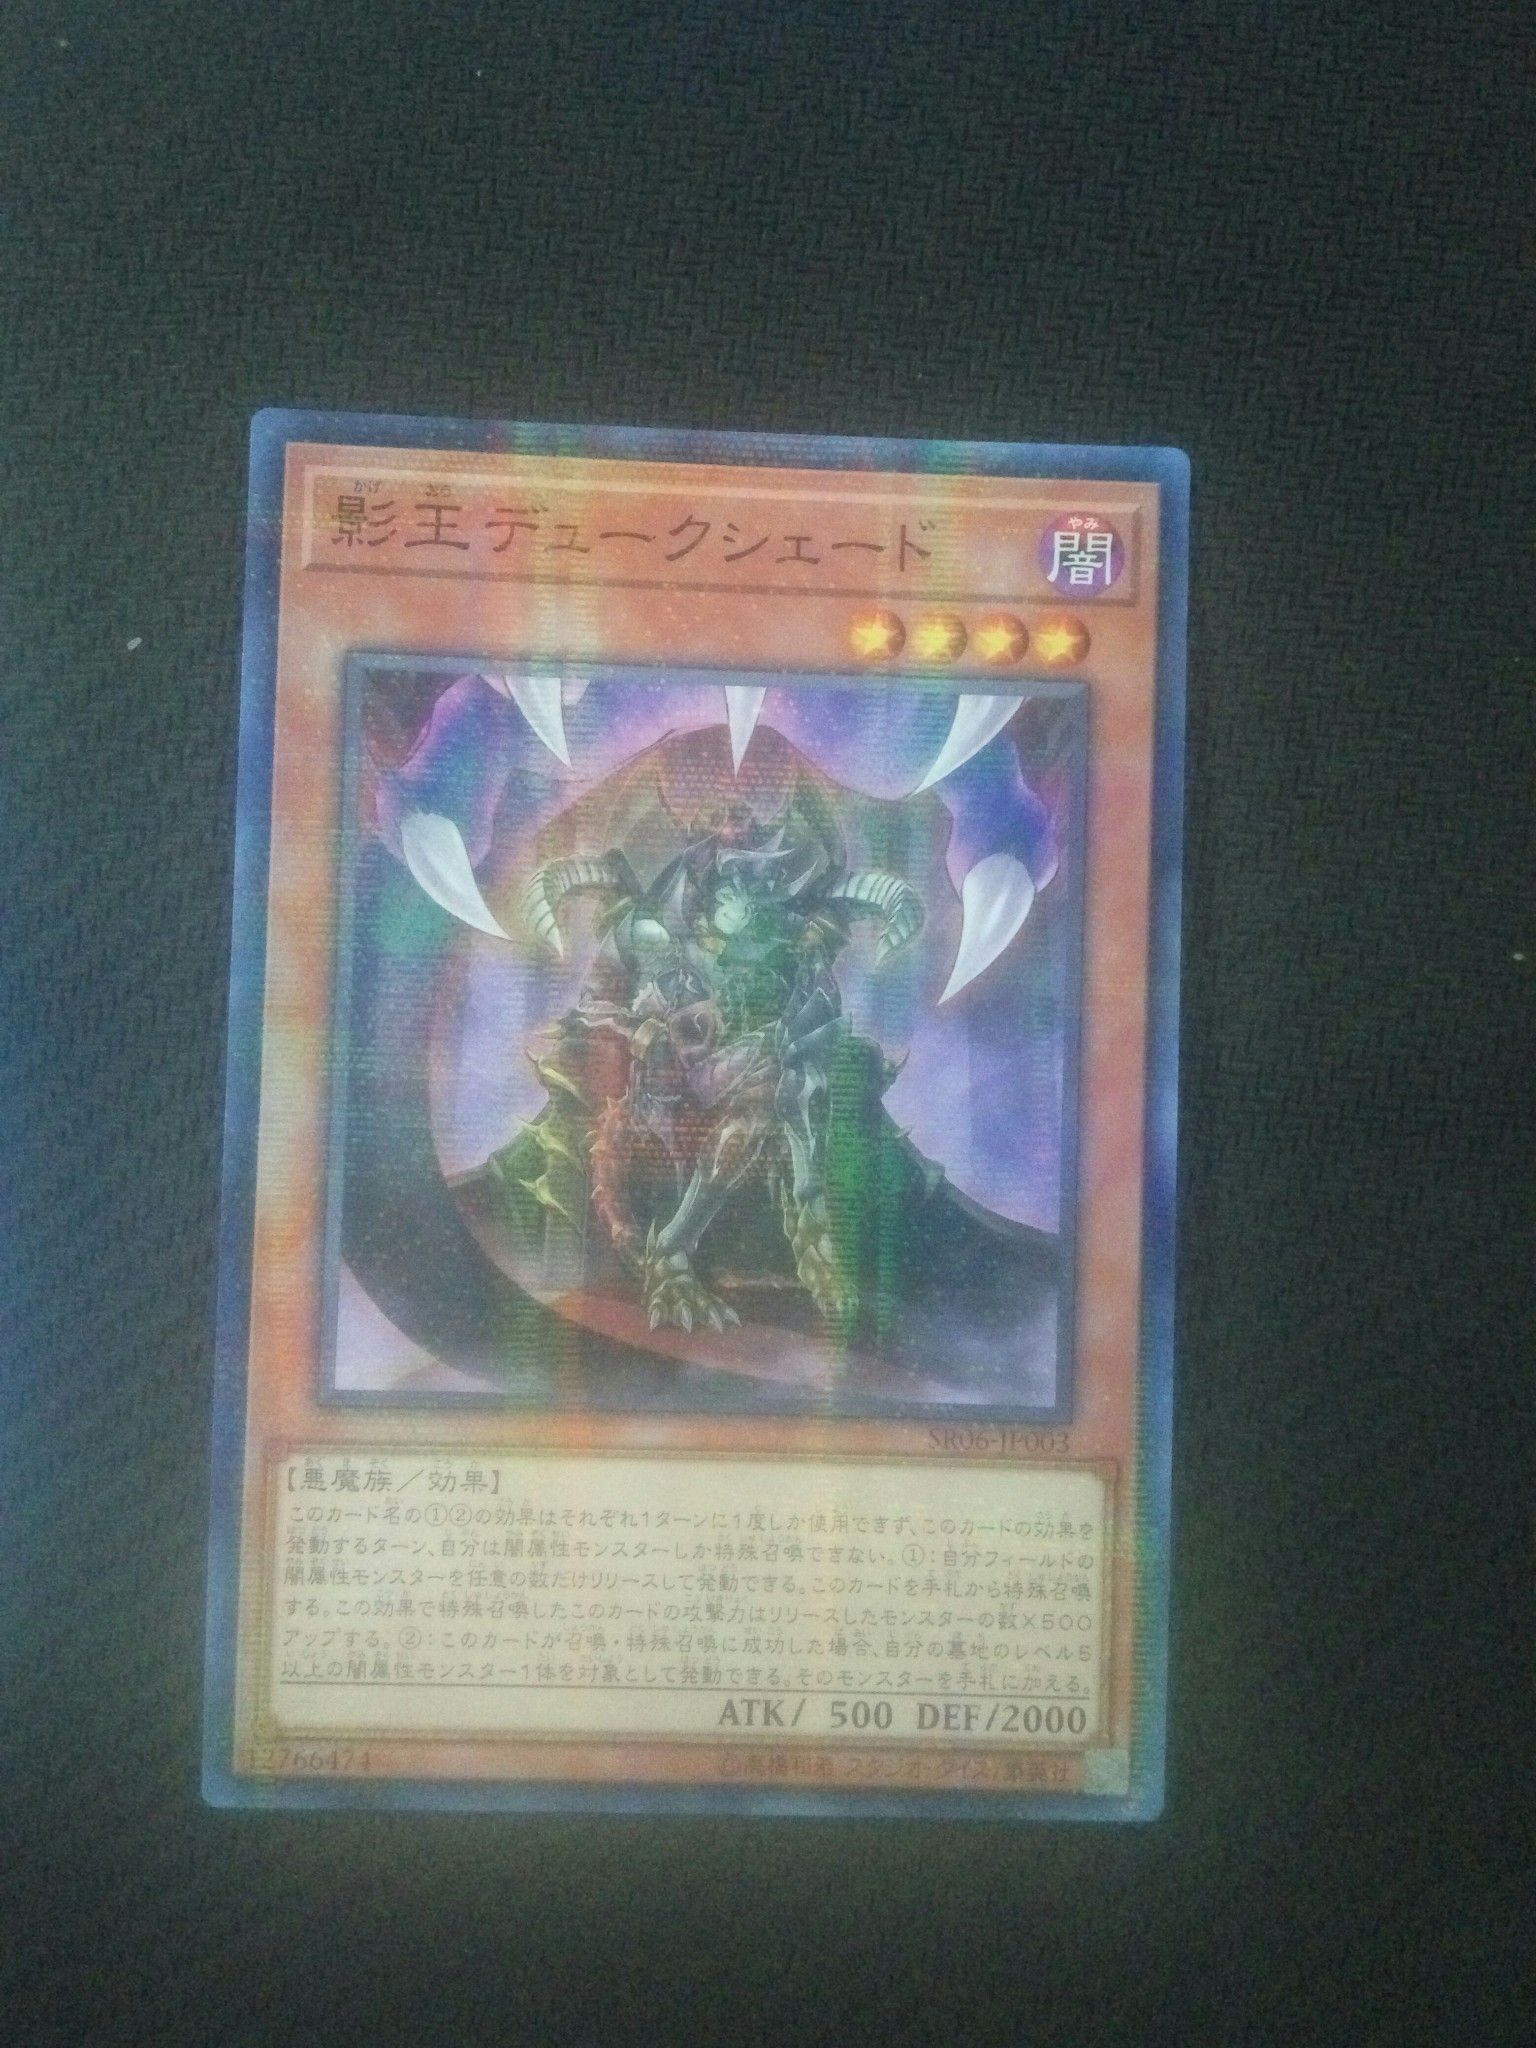 [ JK ] Duke Shade, the Sinister Shadow Lord - SR06-JP003 - Normal Parallel Rare